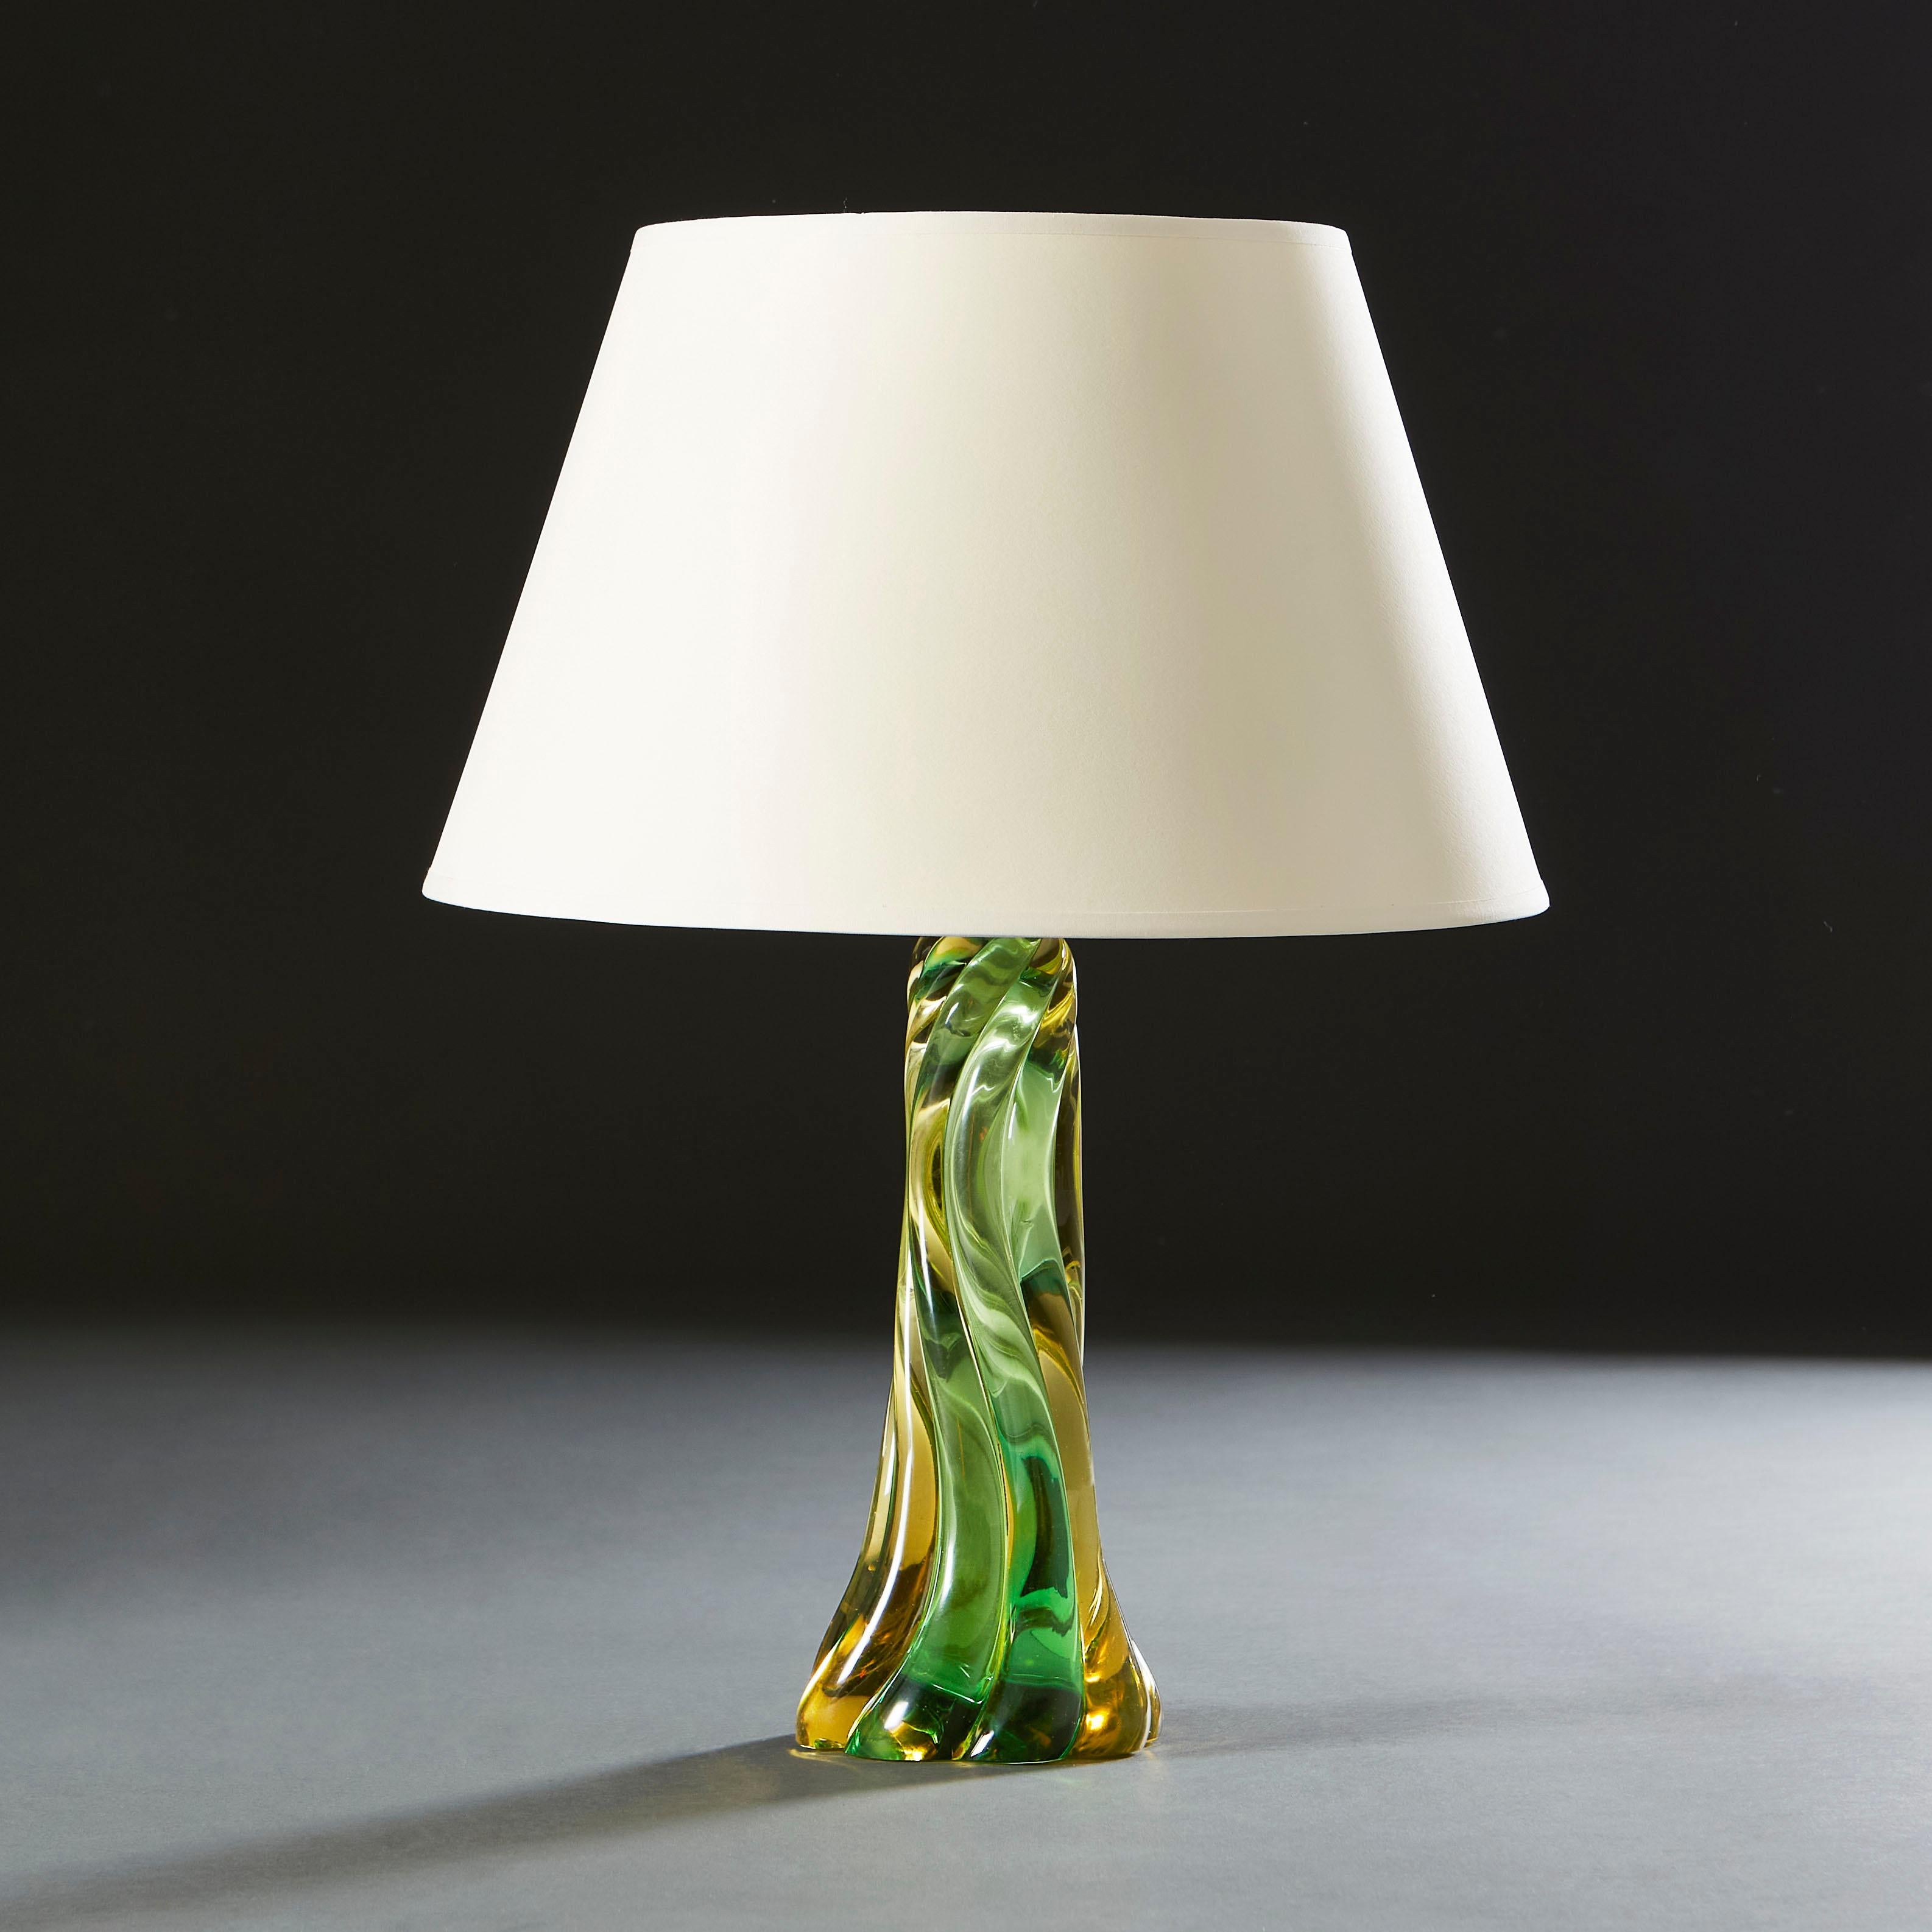 A Murano glass lamp with twisted stem in green and yellow glass.

Currently wired for the UK. 

Please note: Lampshade not included.